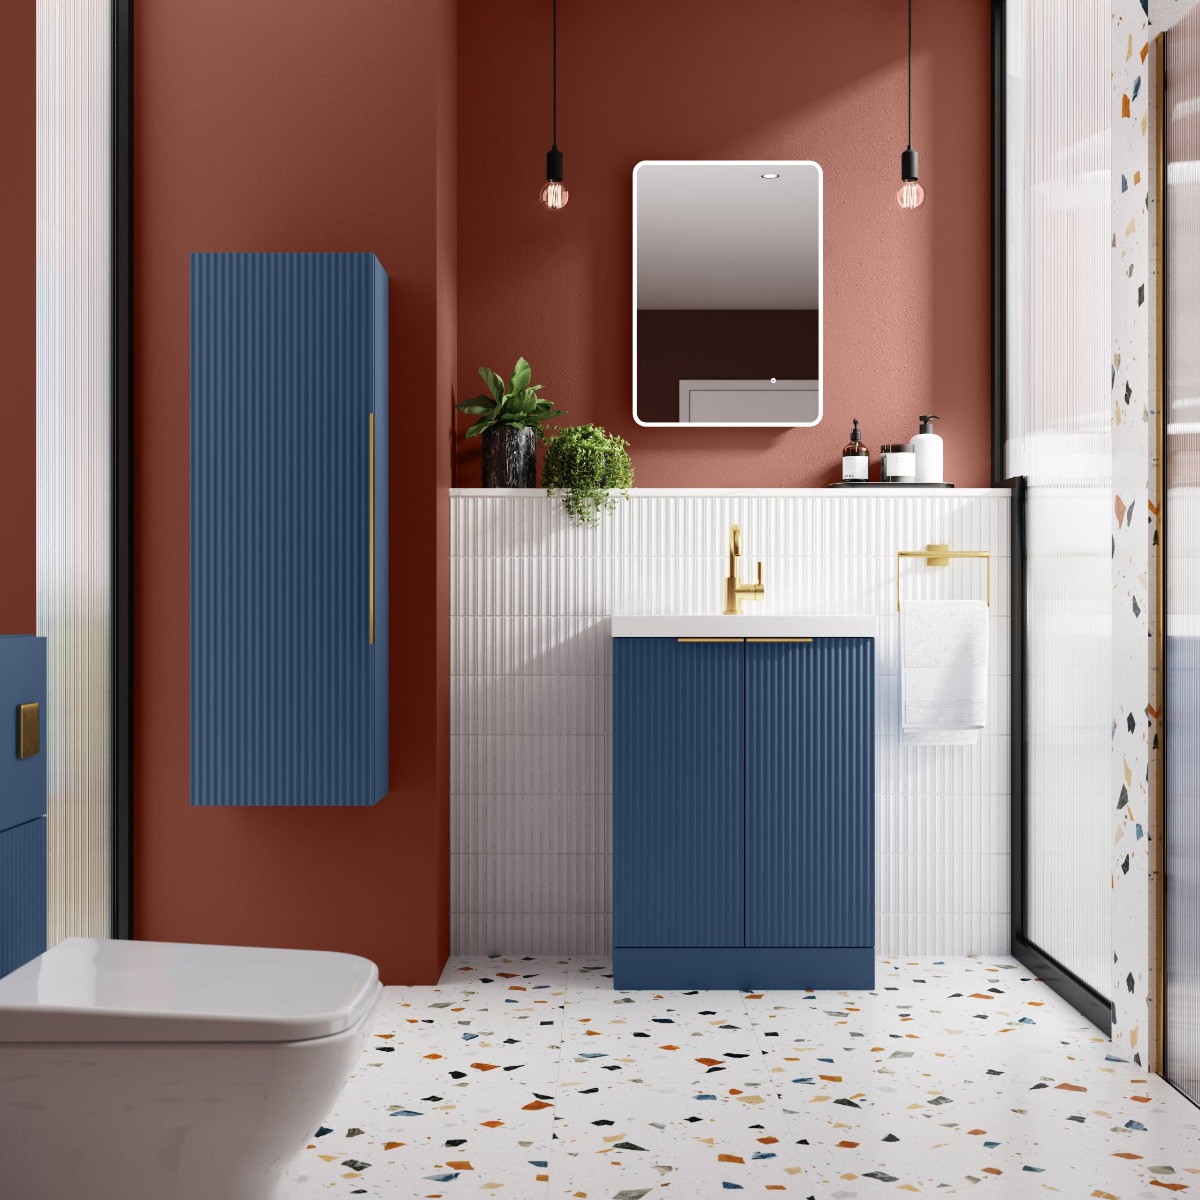 modern bathroom with orange walls and blue furniture features